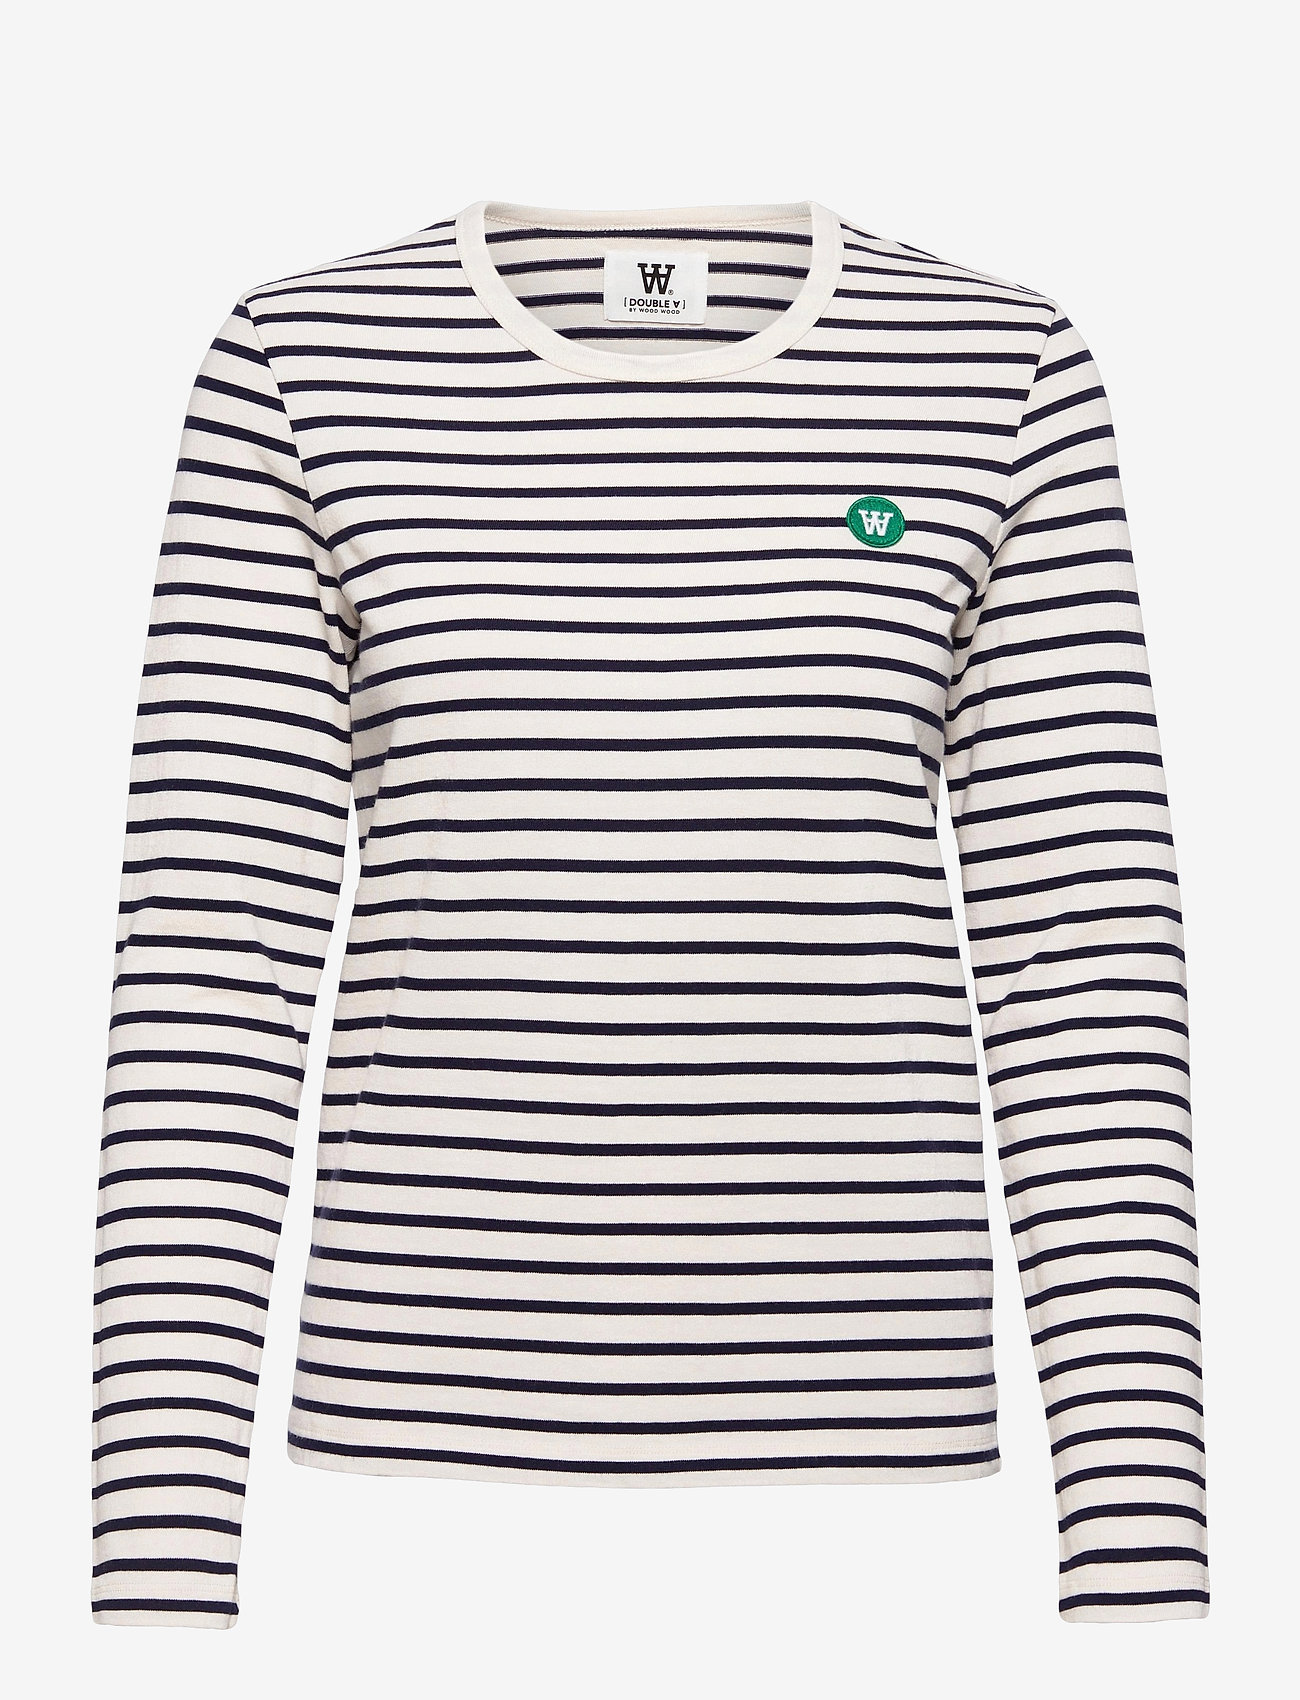 Double A by Wood Wood - Moa stripe long sleeve - t-shirt & tops - off-white/navy stripes - 0